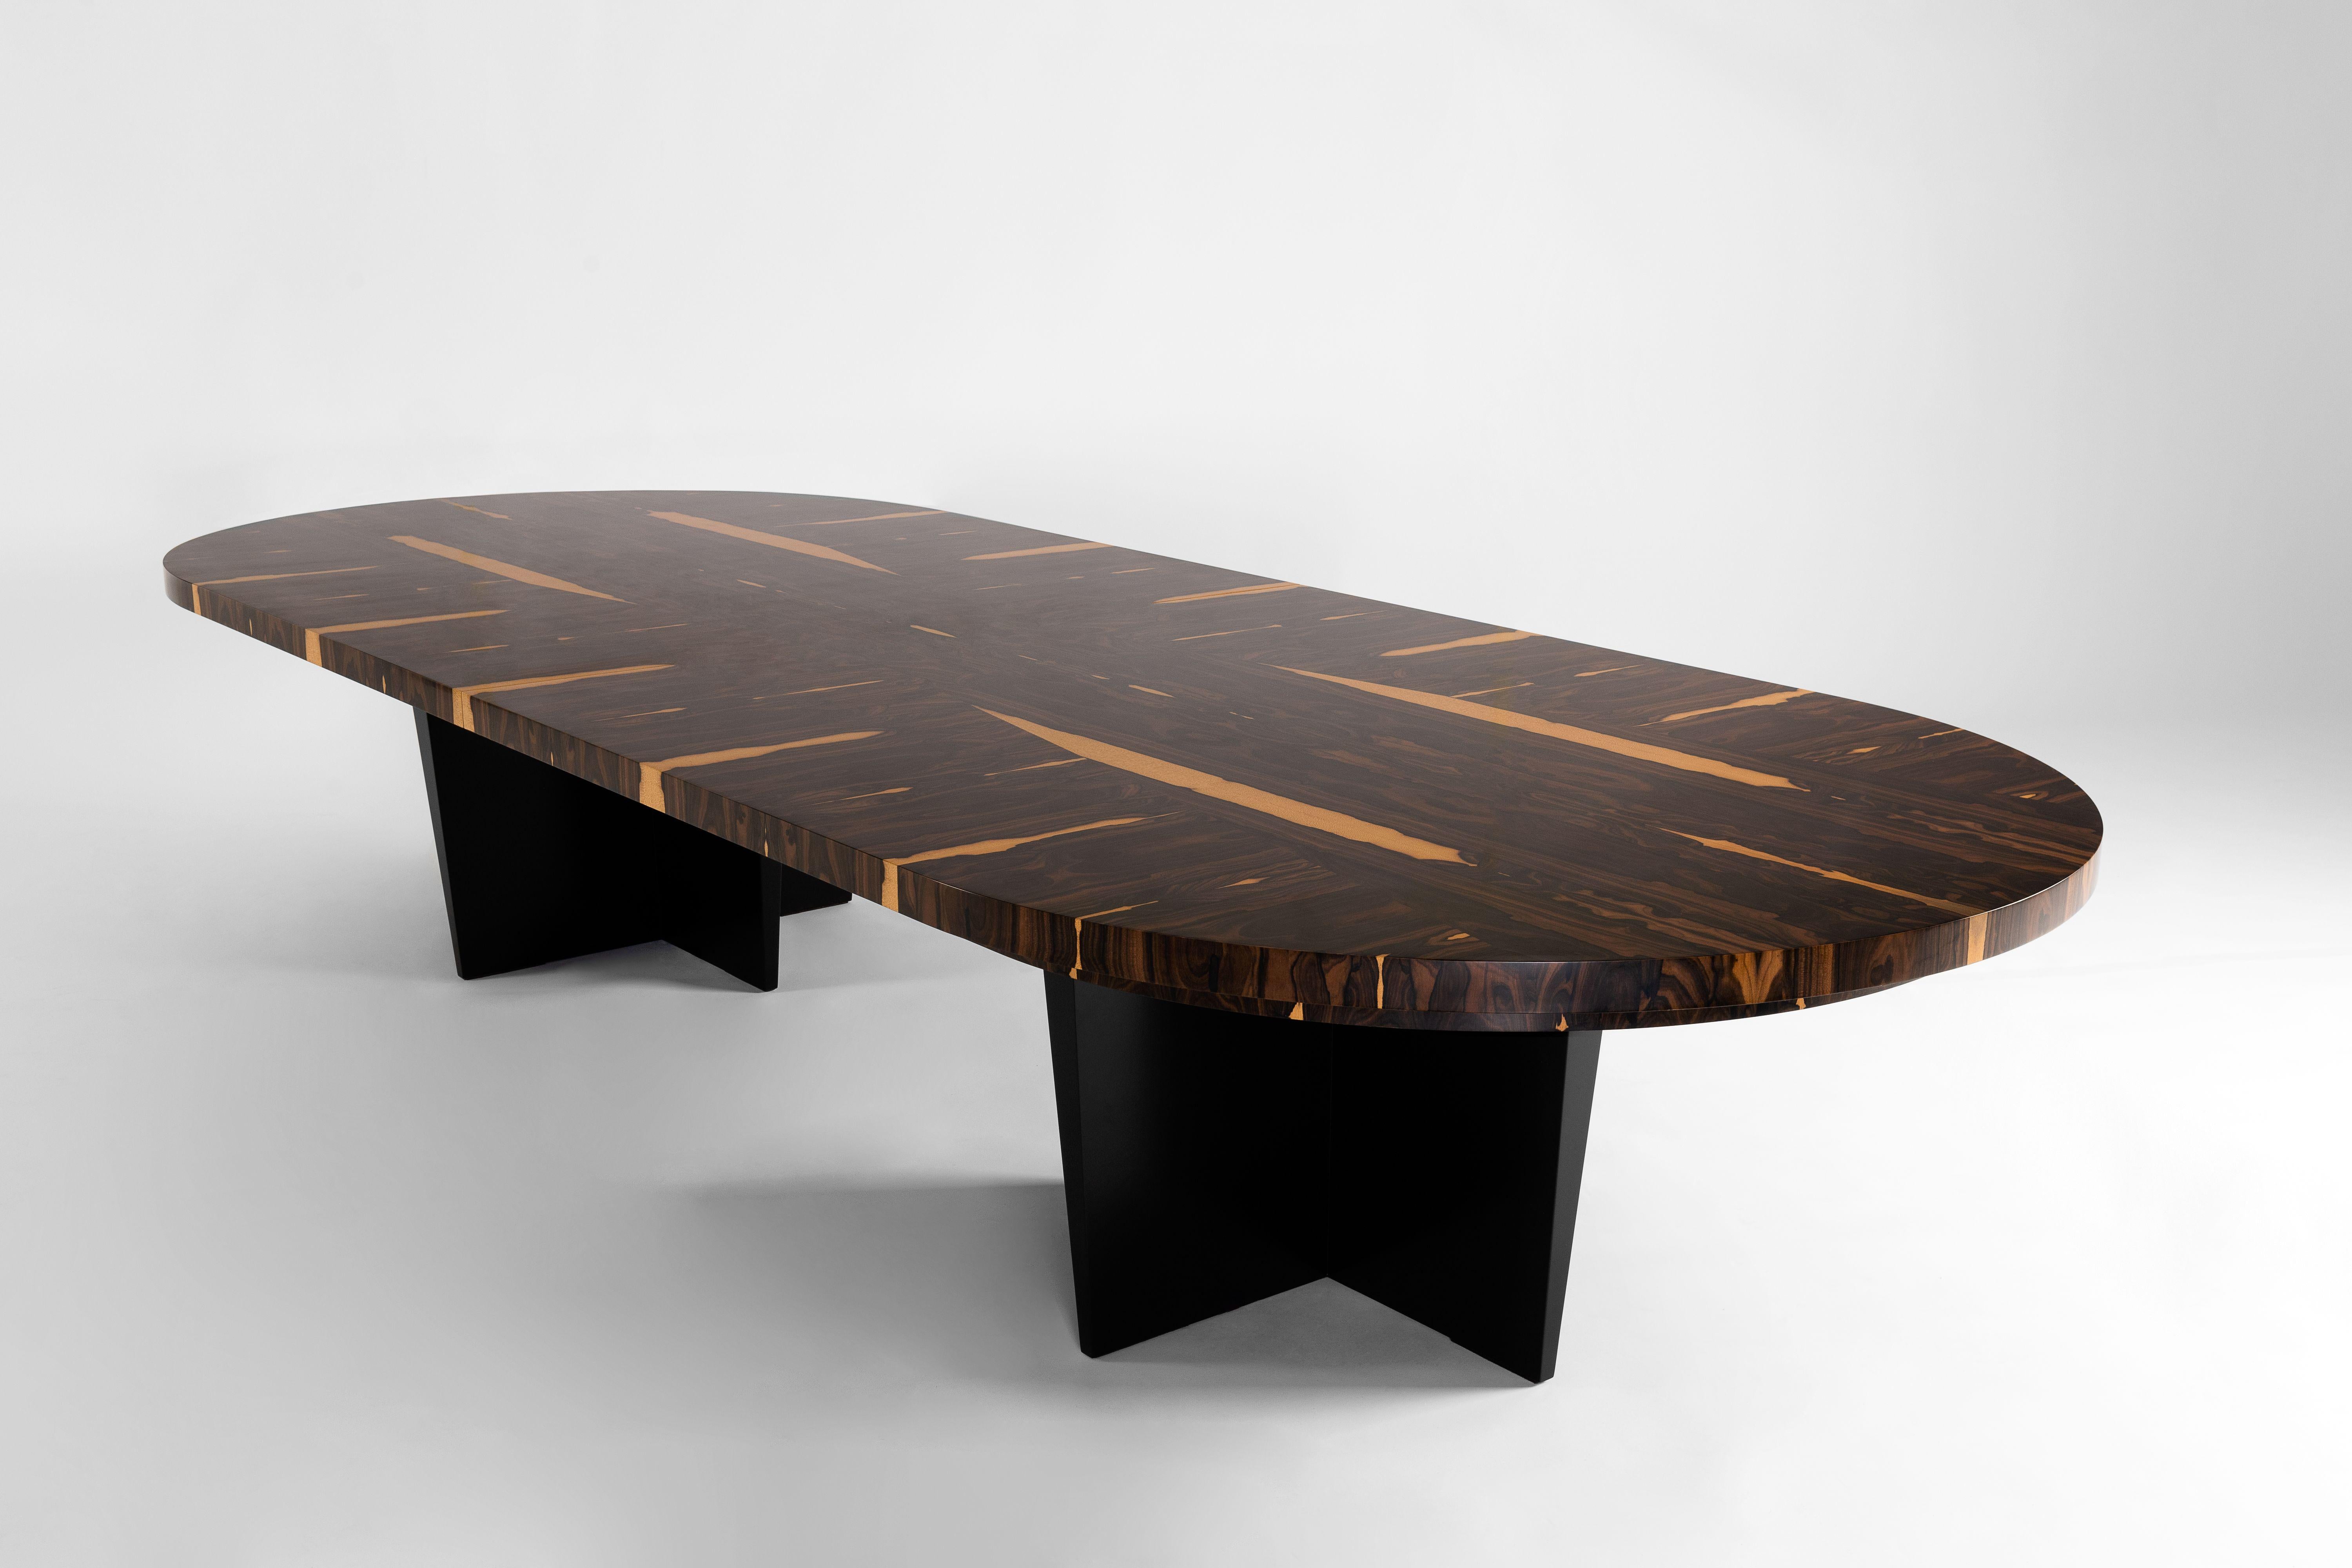 The Alaia dining table is an homage to pre-20 th century Hawaiian surfboards. The top, made from dramatically grained ziricote wood indigenous to Mexico, rests on an ebonized oak base. Ziricote is a non-threatened species often used for fine musical